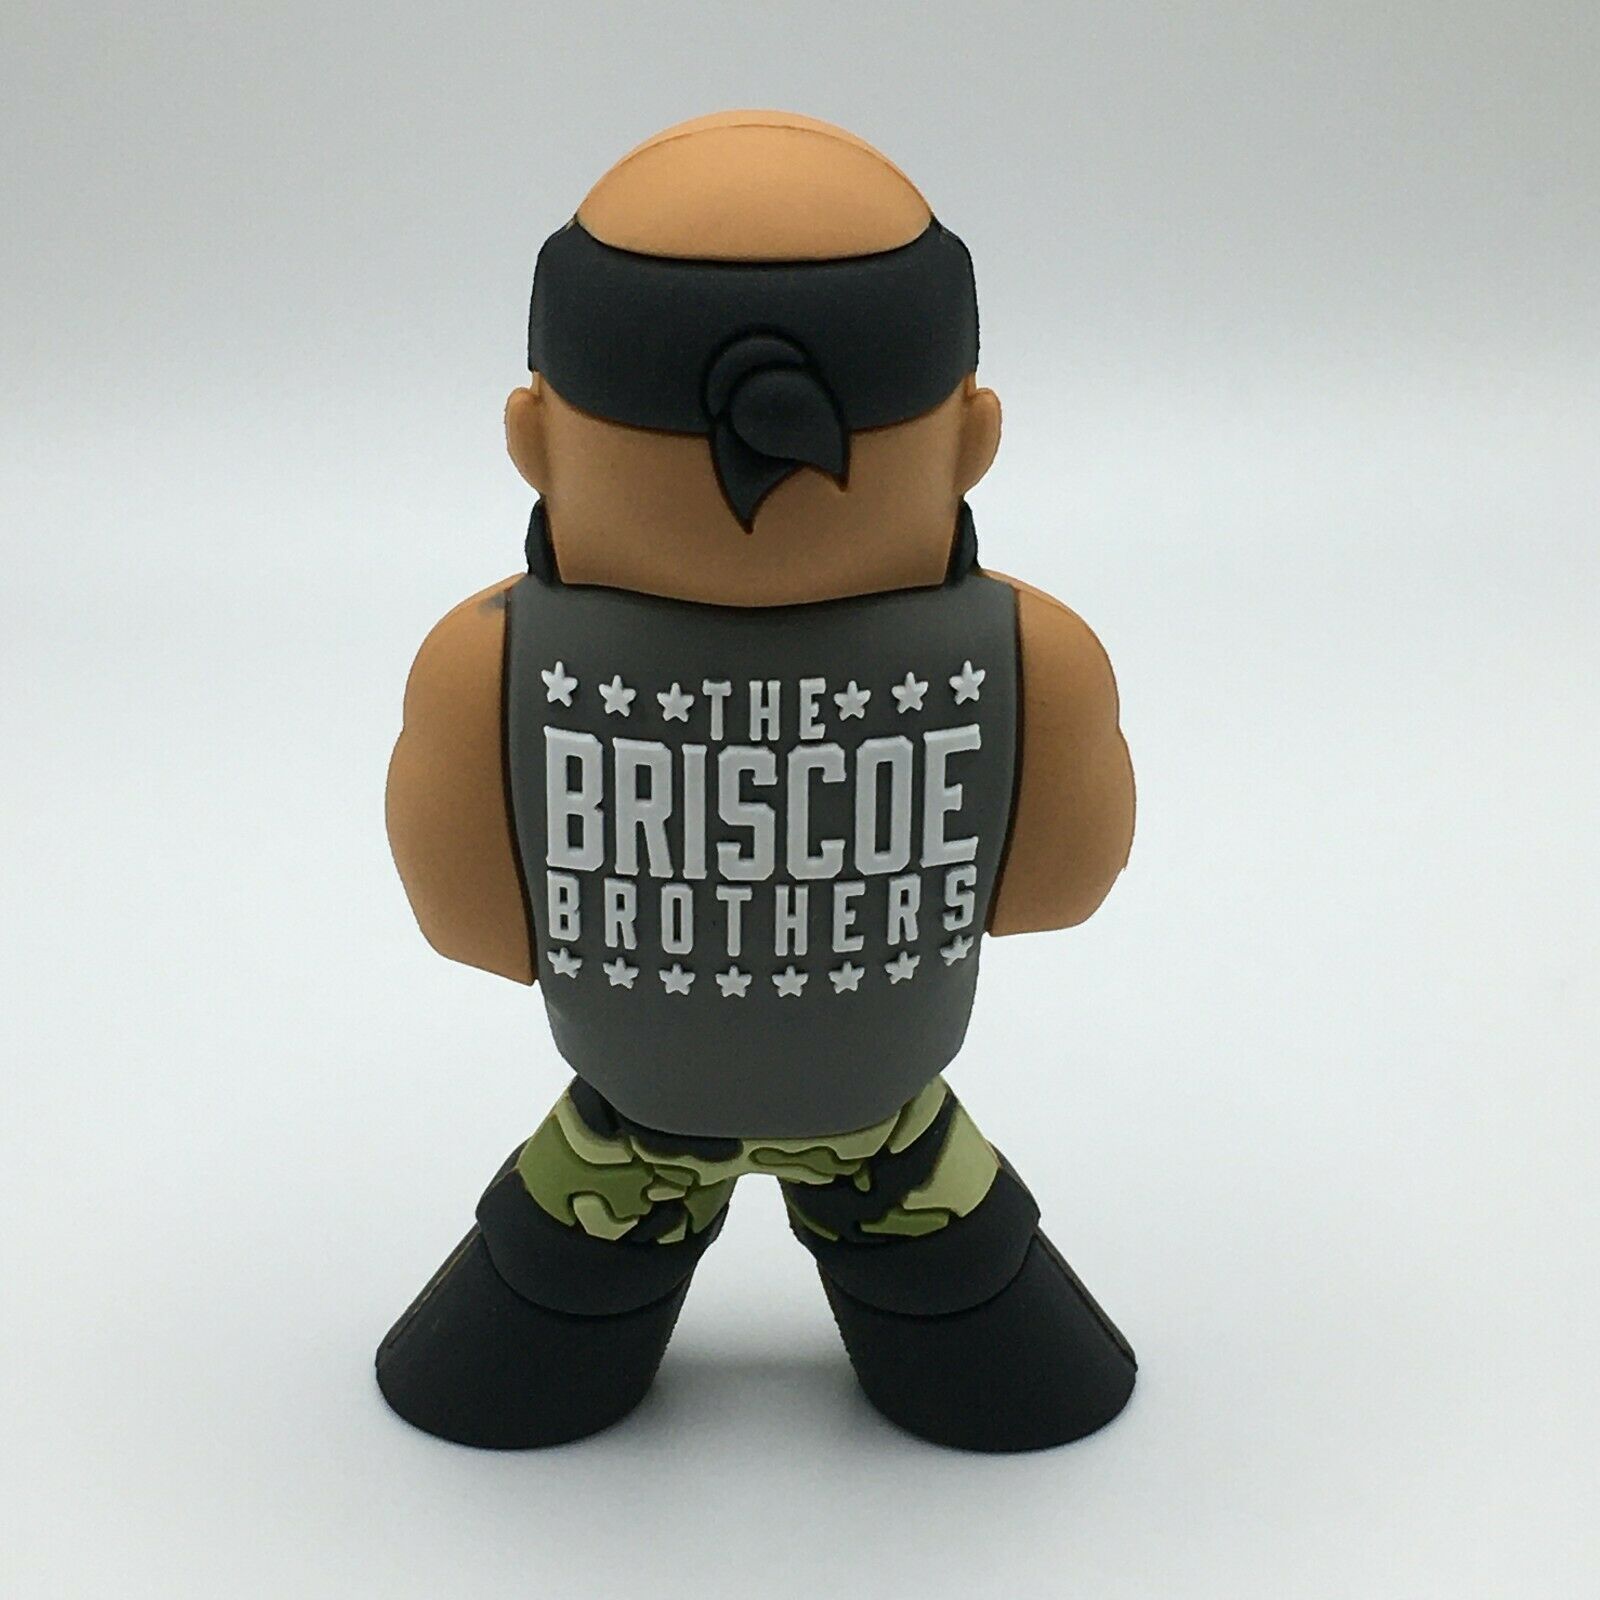 The Blot Says: ECW Hardcore Legends Micro Brawlers Figures by